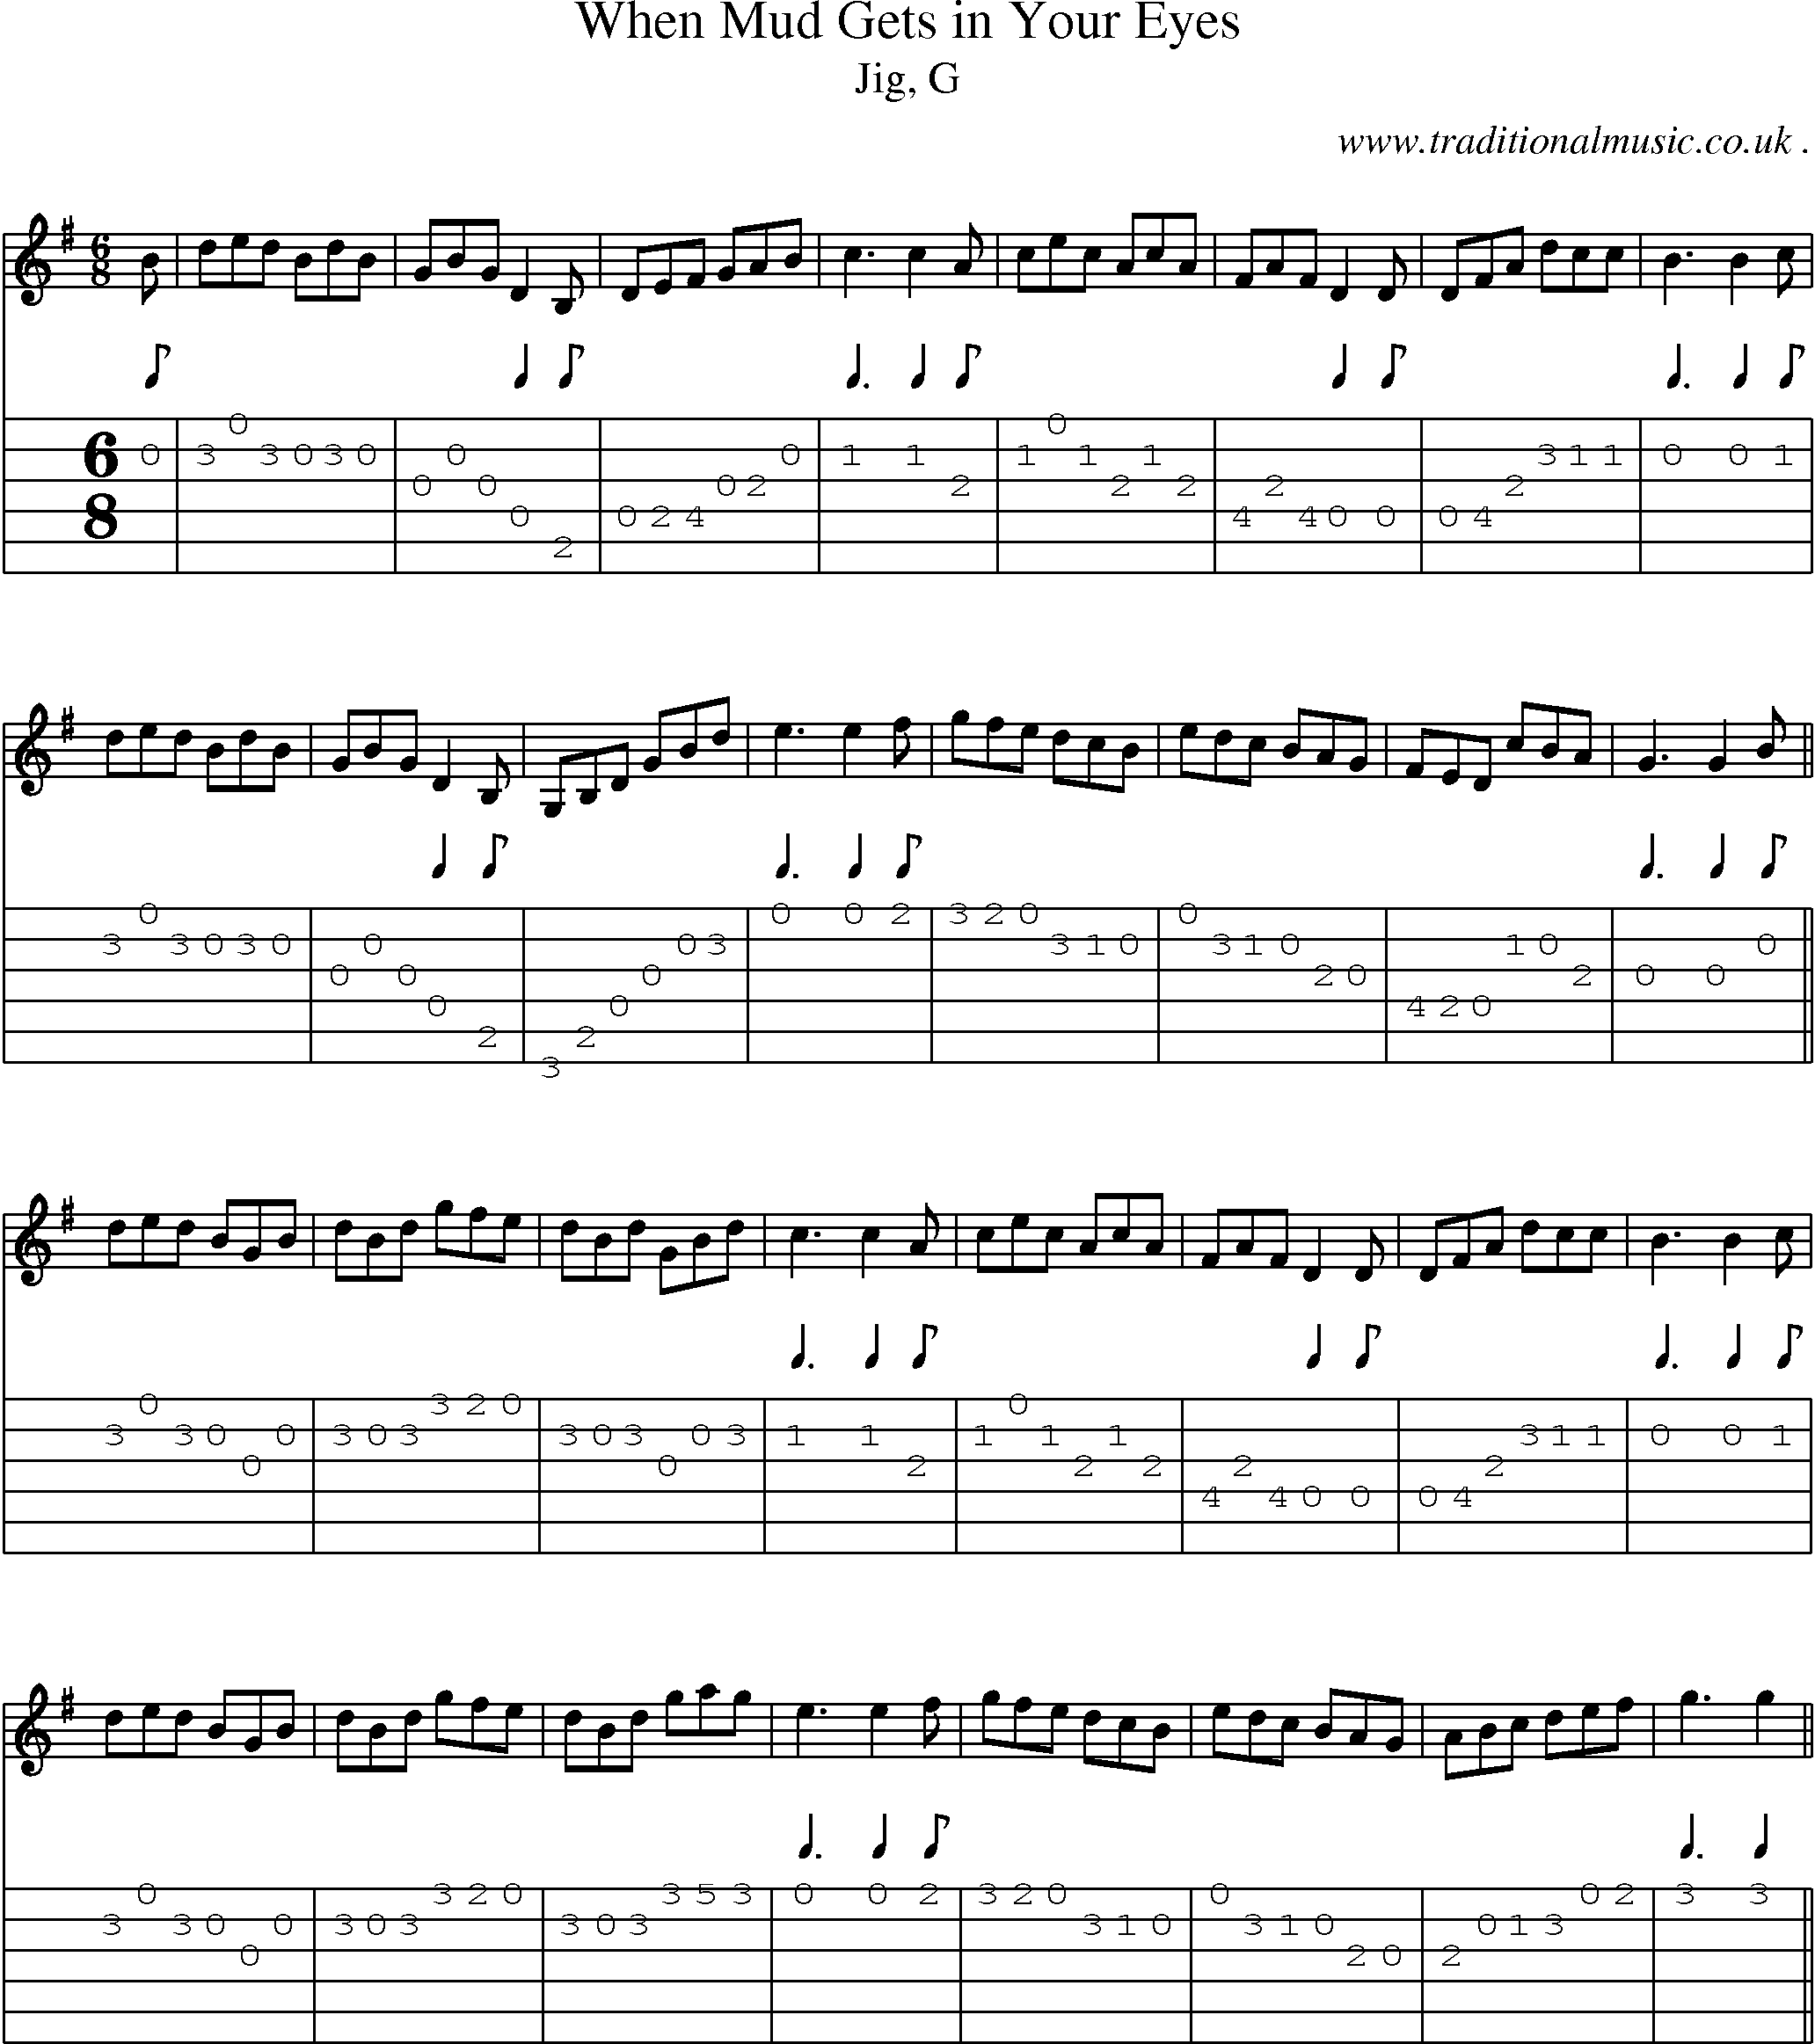 Sheet-music  score, Chords and Guitar Tabs for When Mud Gets In Your Eyes